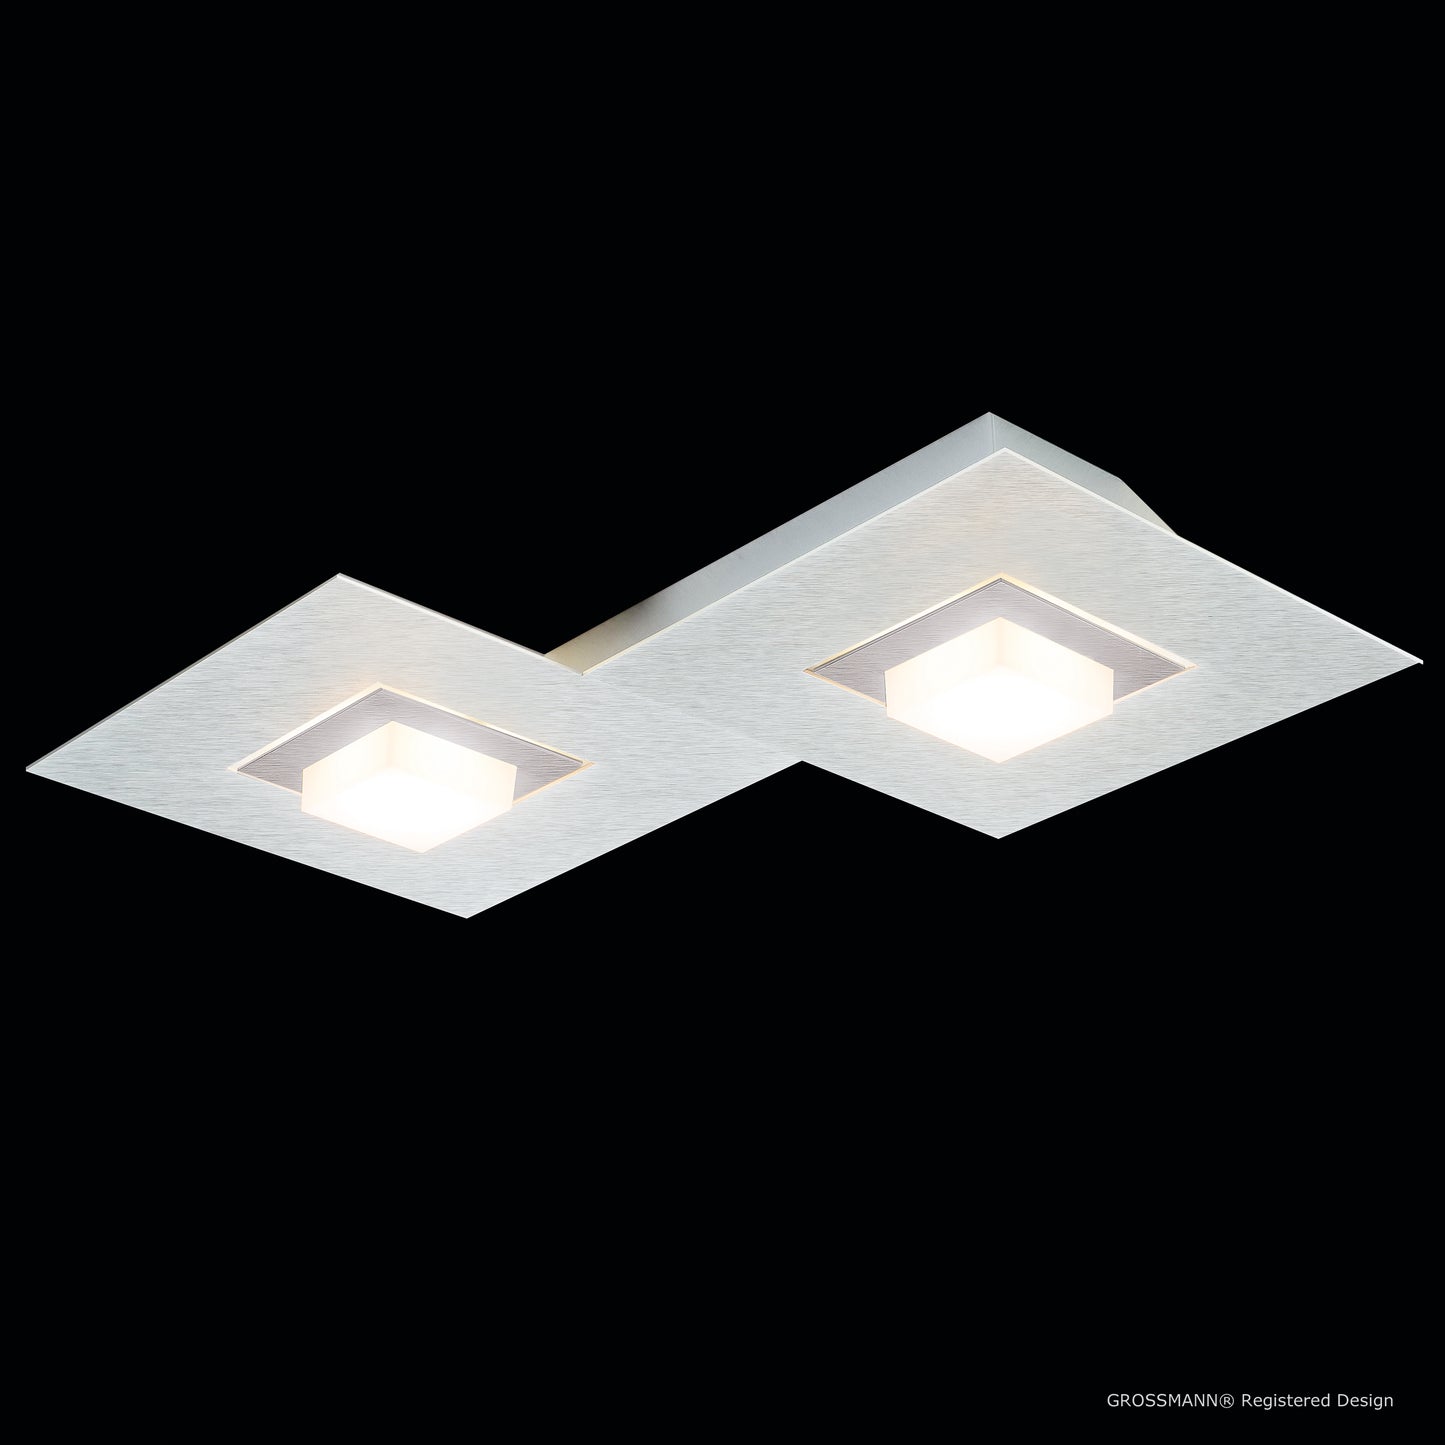 Grossmann KARREE Pearlescent Two Lamp Wall / Ceiling Light - Colour Frame Options